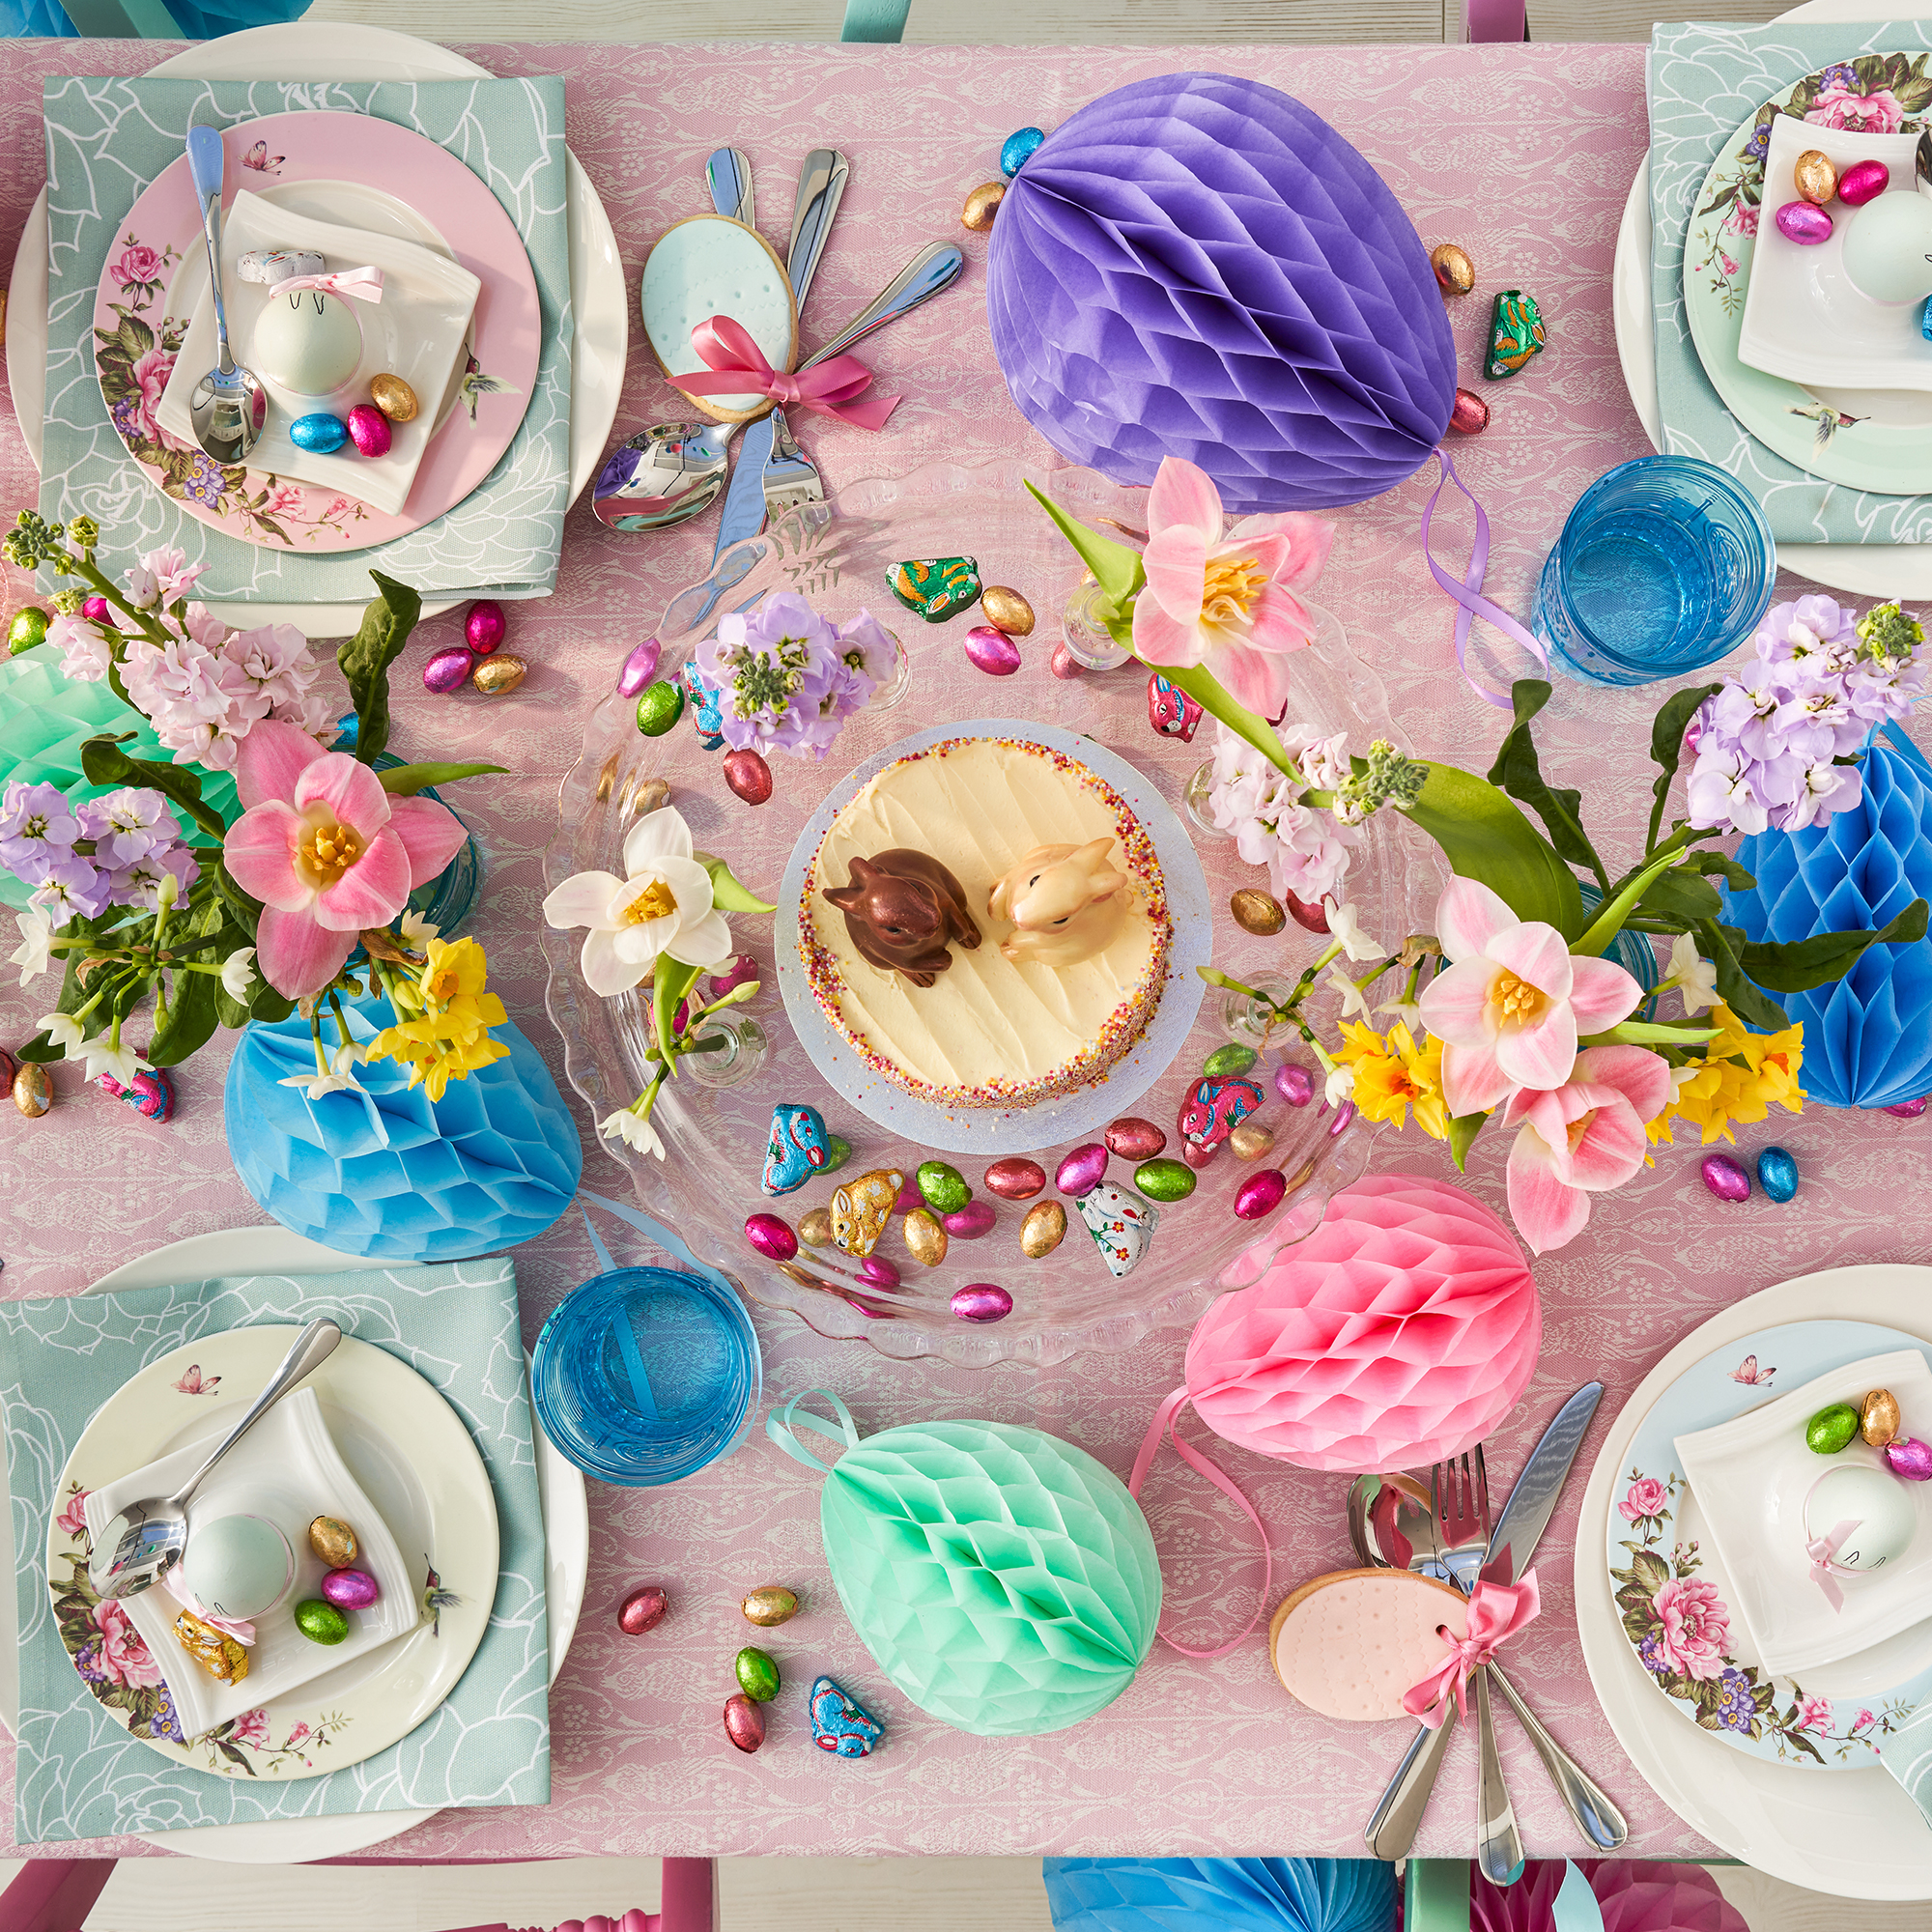 Overhead shot of a table decorated for easter with a pink tablecloth and colourful decorations